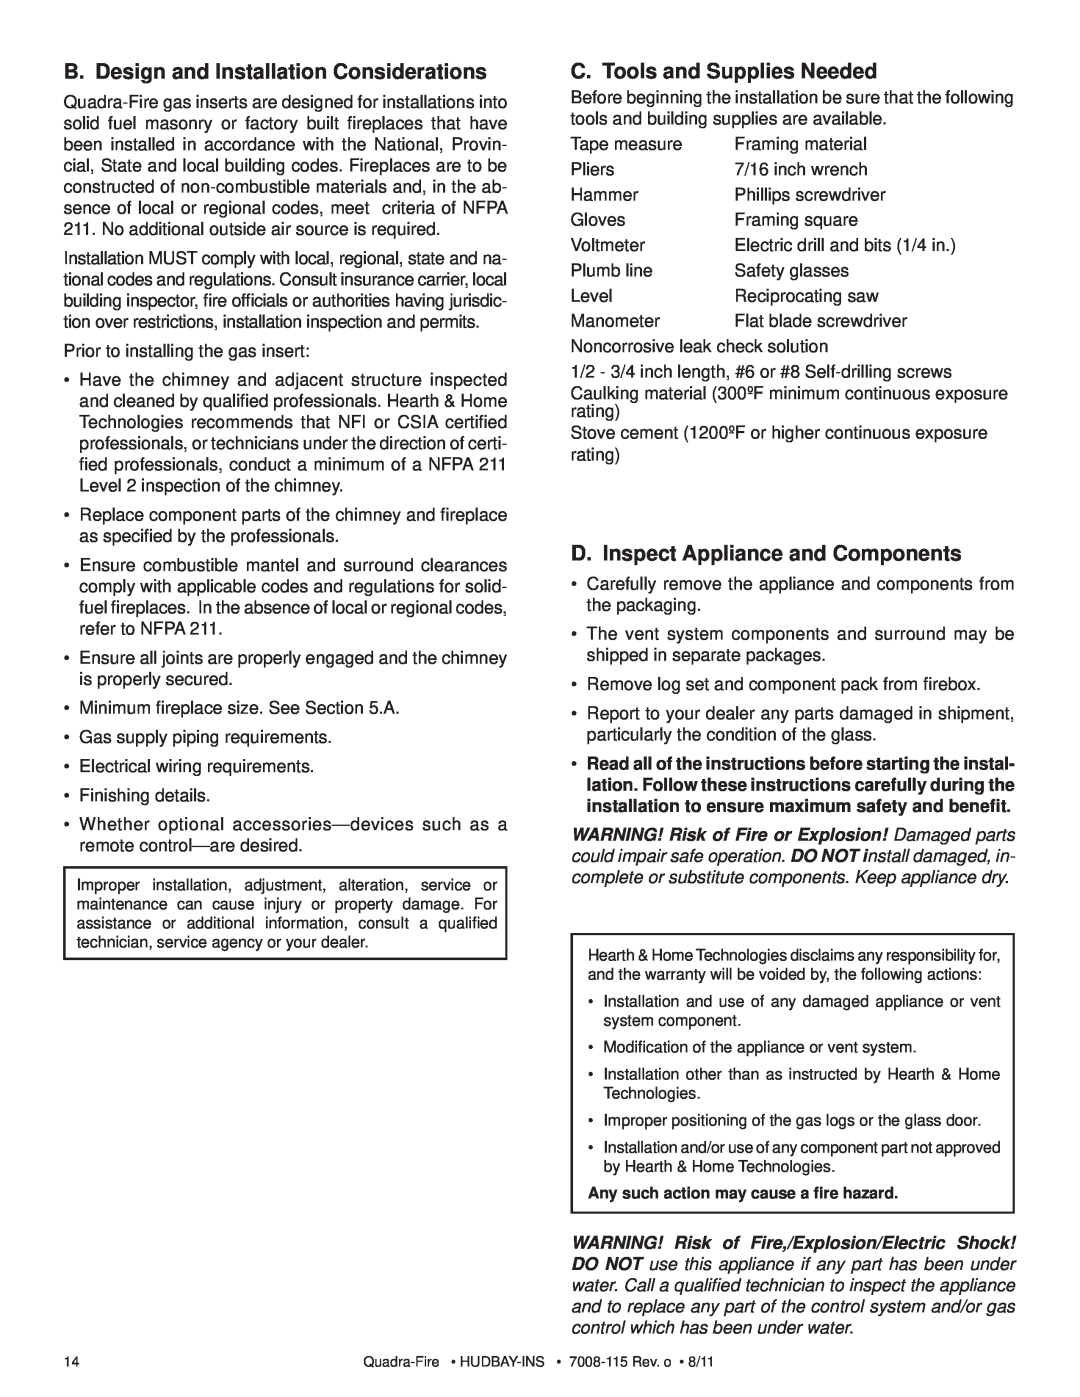 Quadra-Fire 7008-115 owner manual B. Design and Installation Considerations, C. Tools and Supplies Needed 